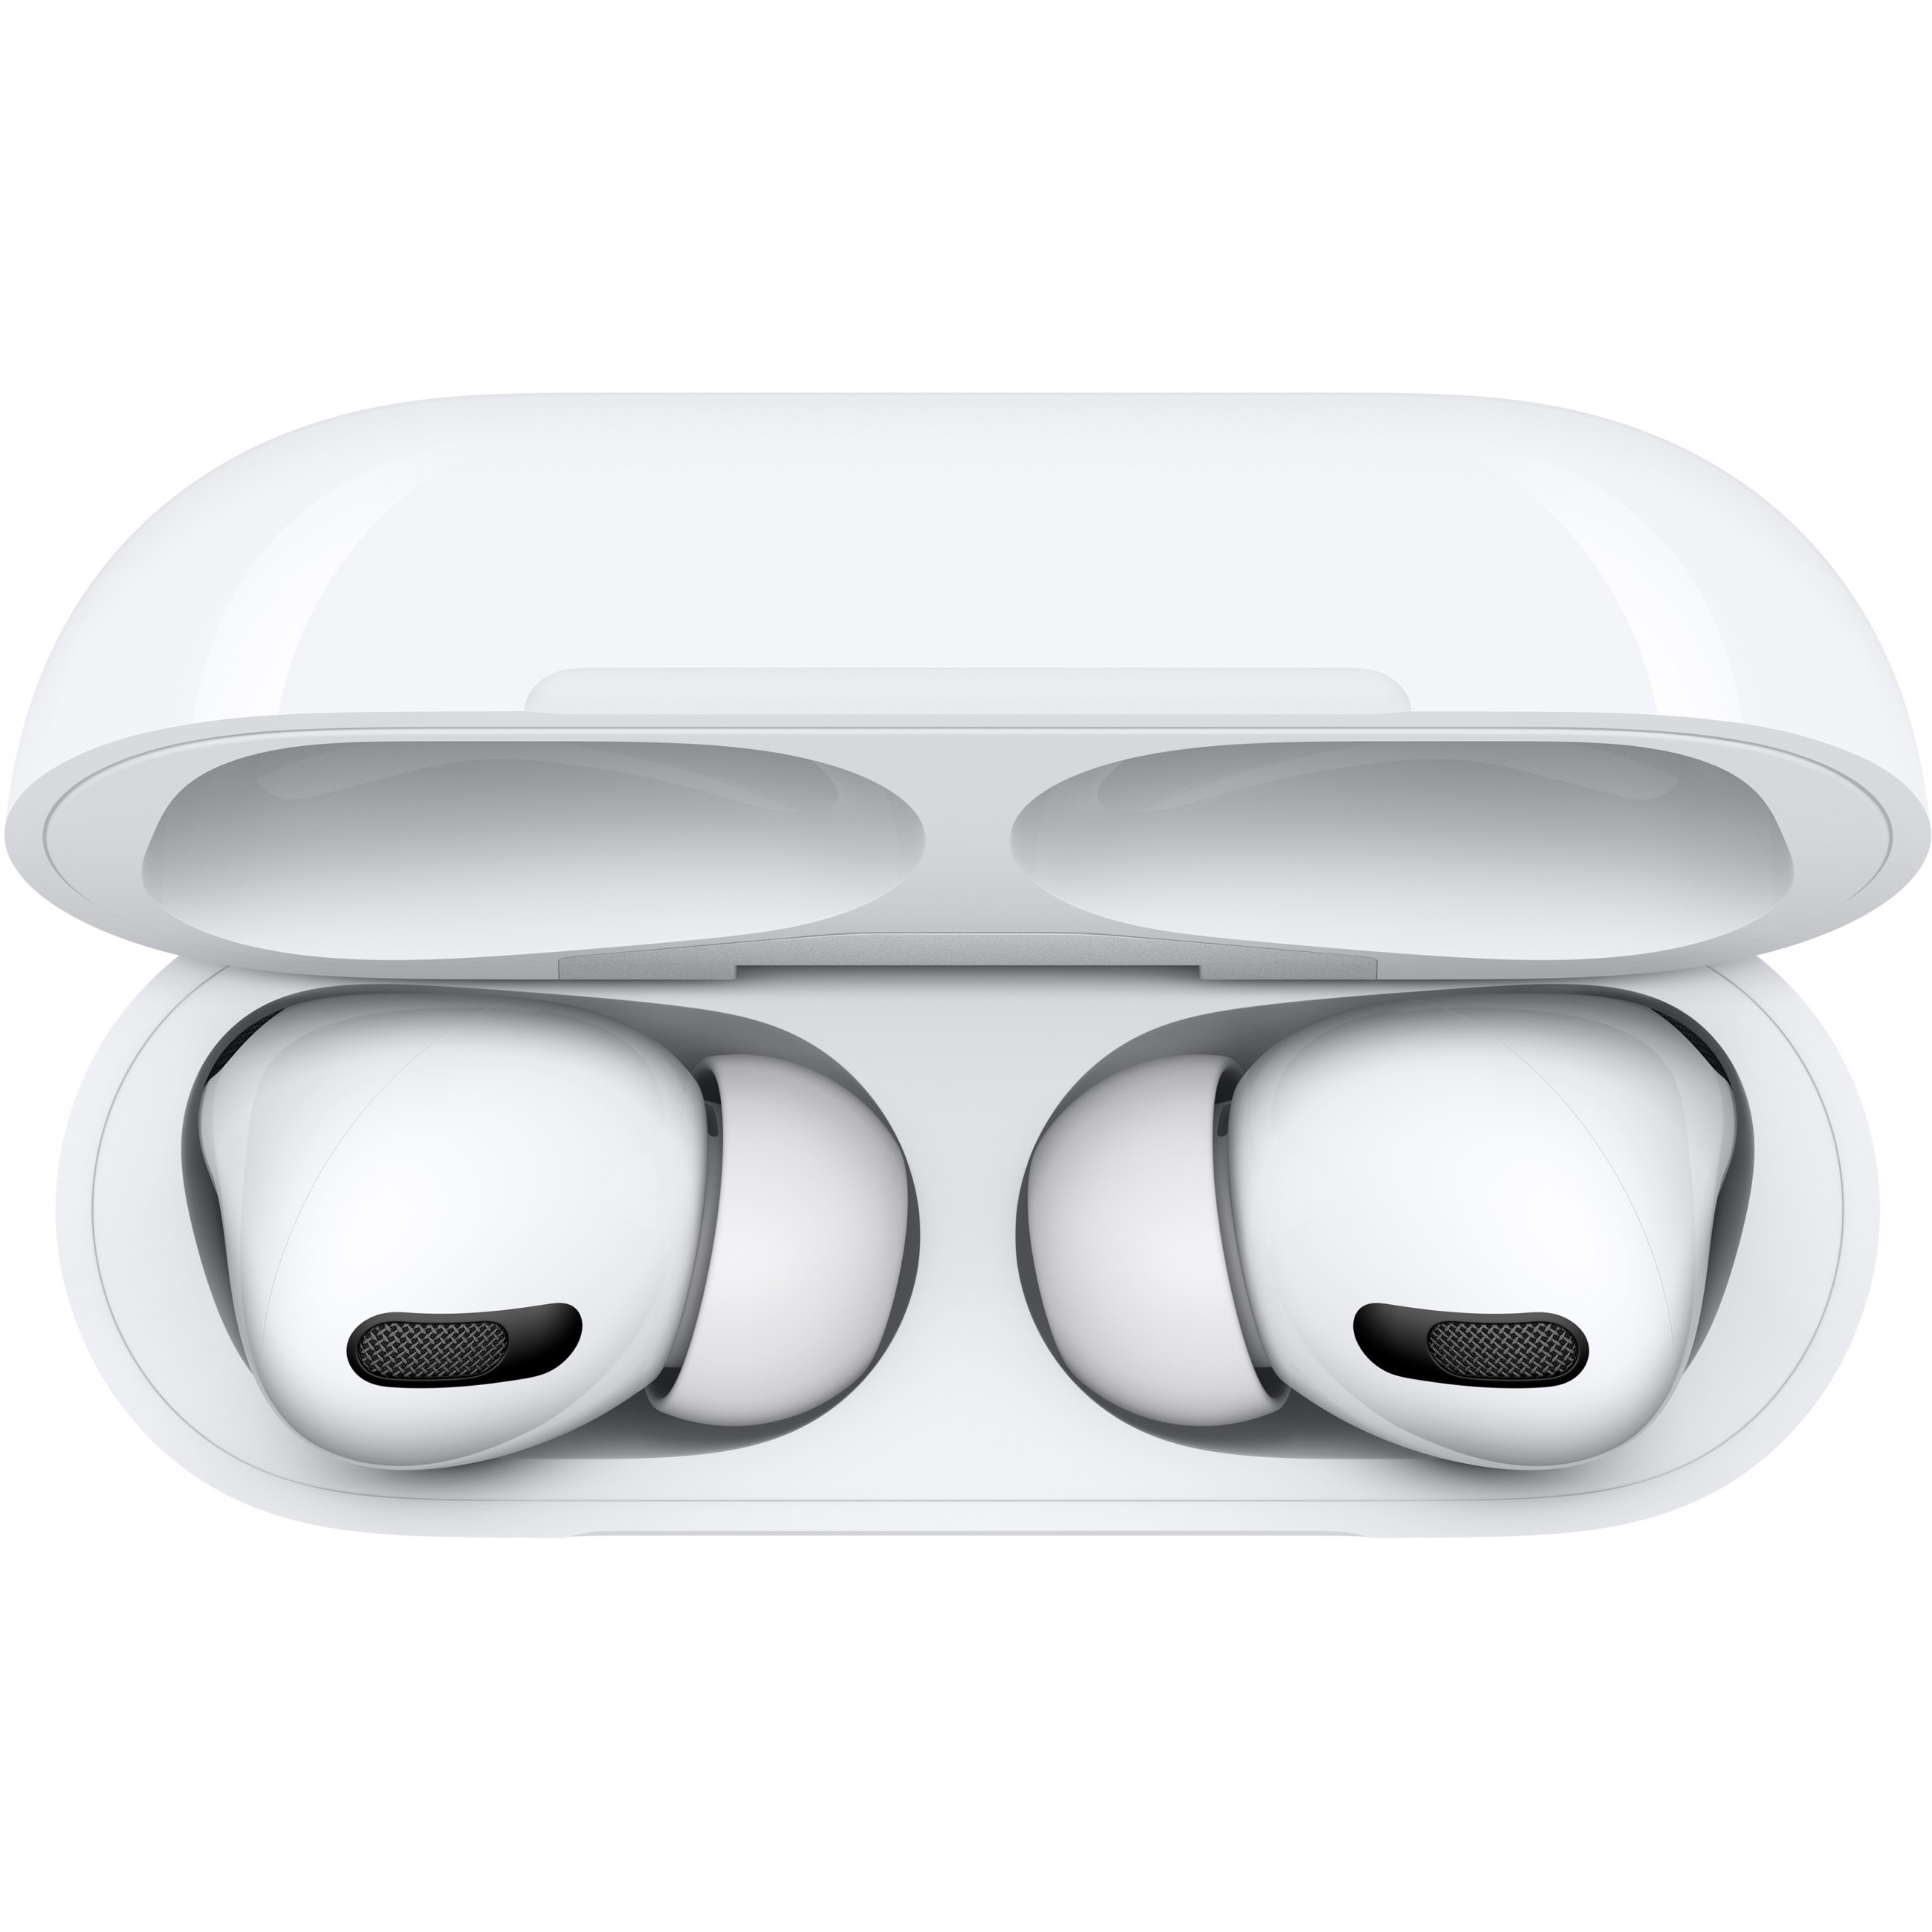 Apple AirPods Pro with MagSafe Charging Case AirPods Kopfhörer Kabellos im Ohr Anrufe/Musik Bluetooth Weiß